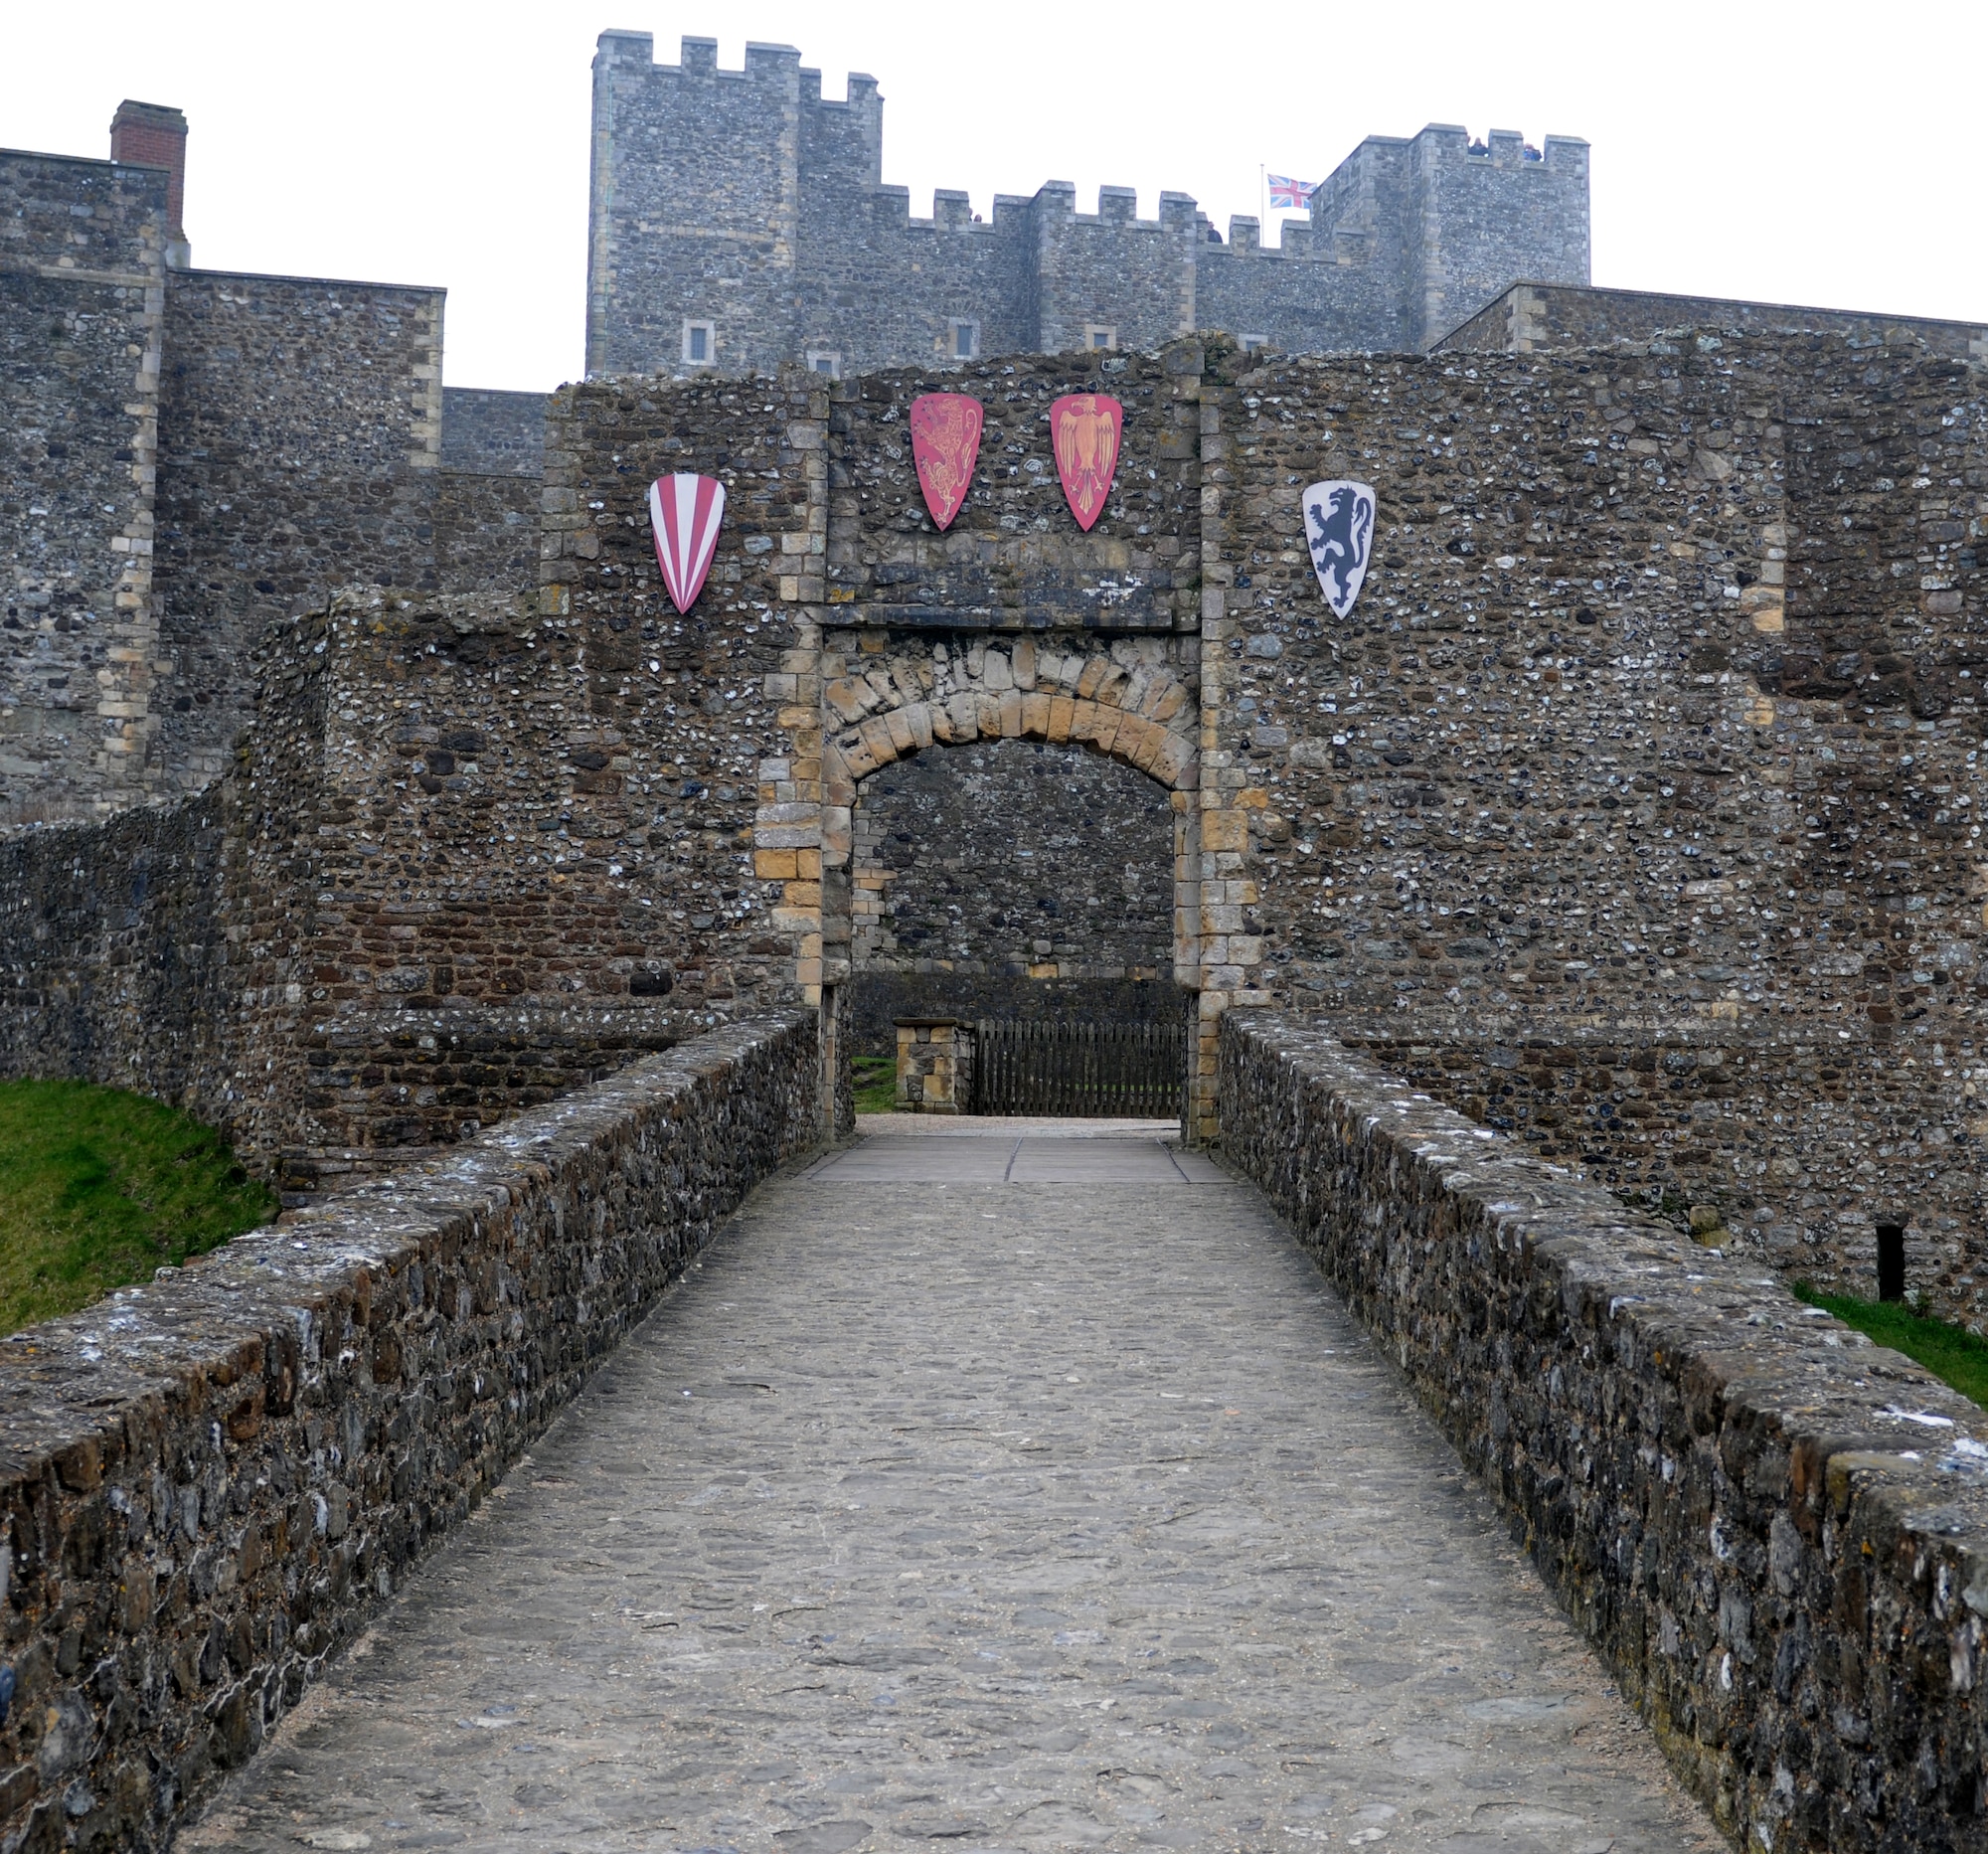 DOVER, England – This outer defense to the King’s Gate at Dover Castle was built in the 12th century.  Participants in an RAF Lakenheath Information Tickets and Travel trip went to the castle March 26, 2011. (U.S. Air Force photo/Staff Sgt. Stephen Linch)